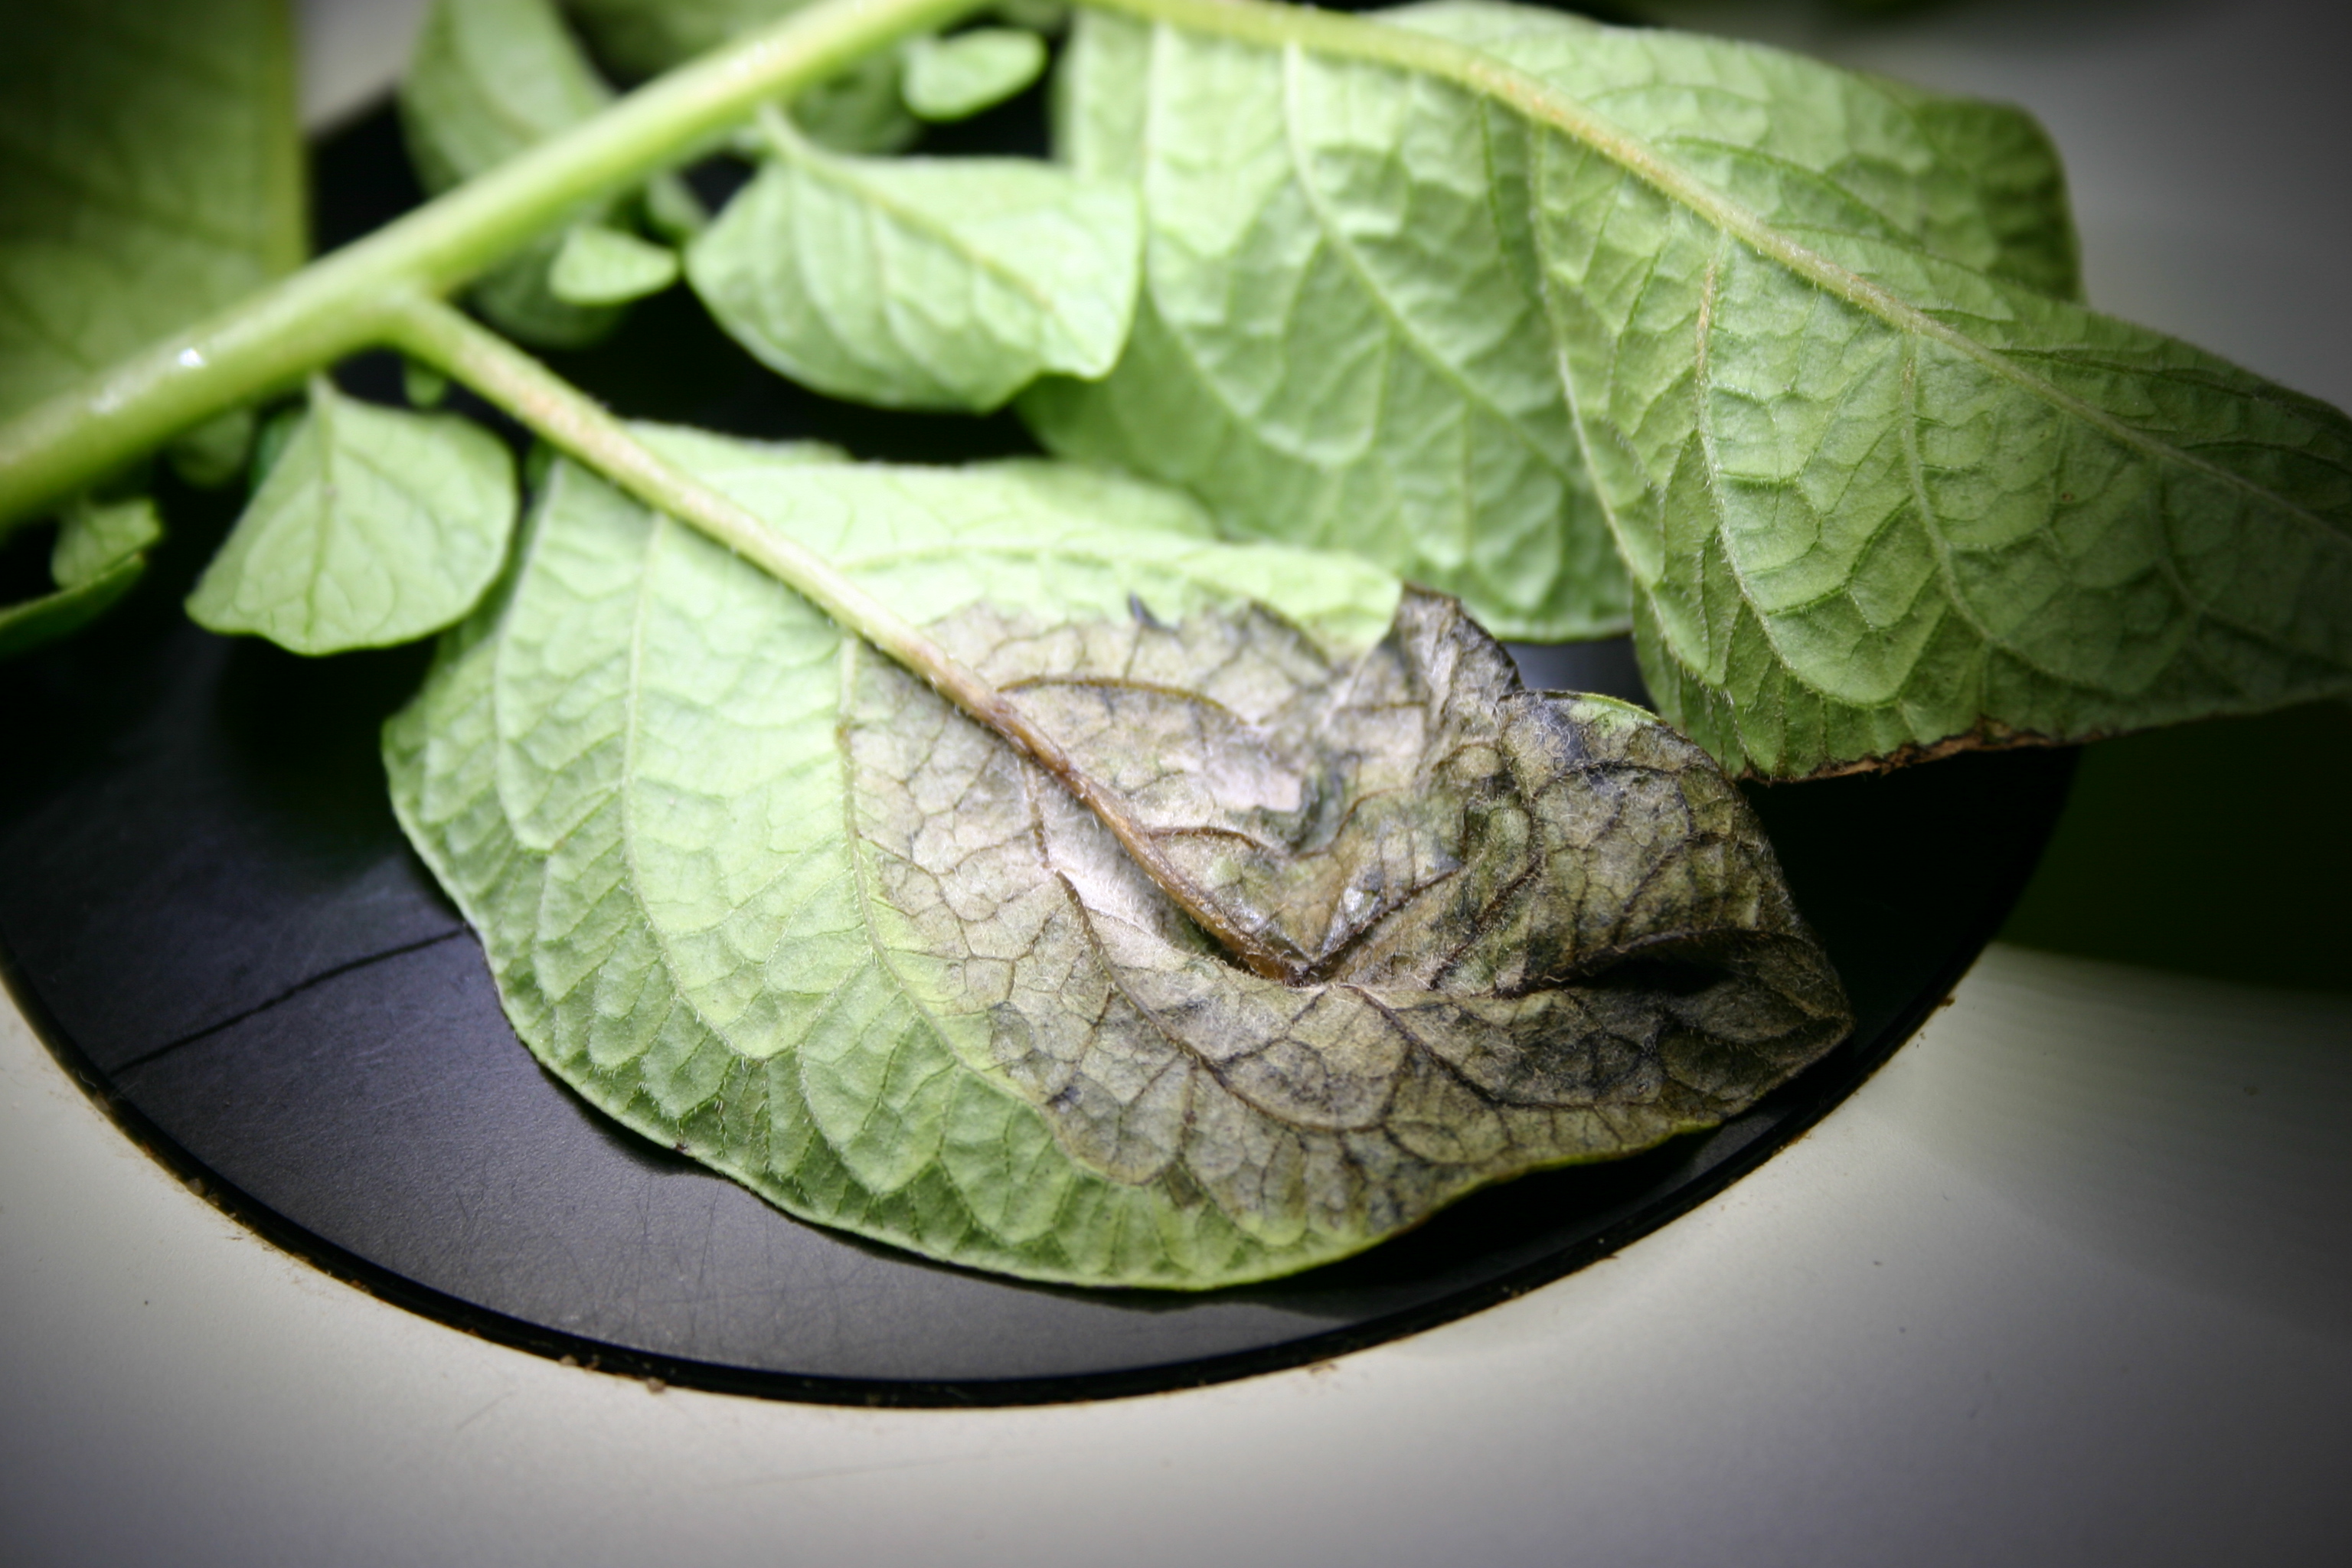 Late blight symptoms on potato leaf (Photo, North Carolina Plant Disease and Insect Clinic)